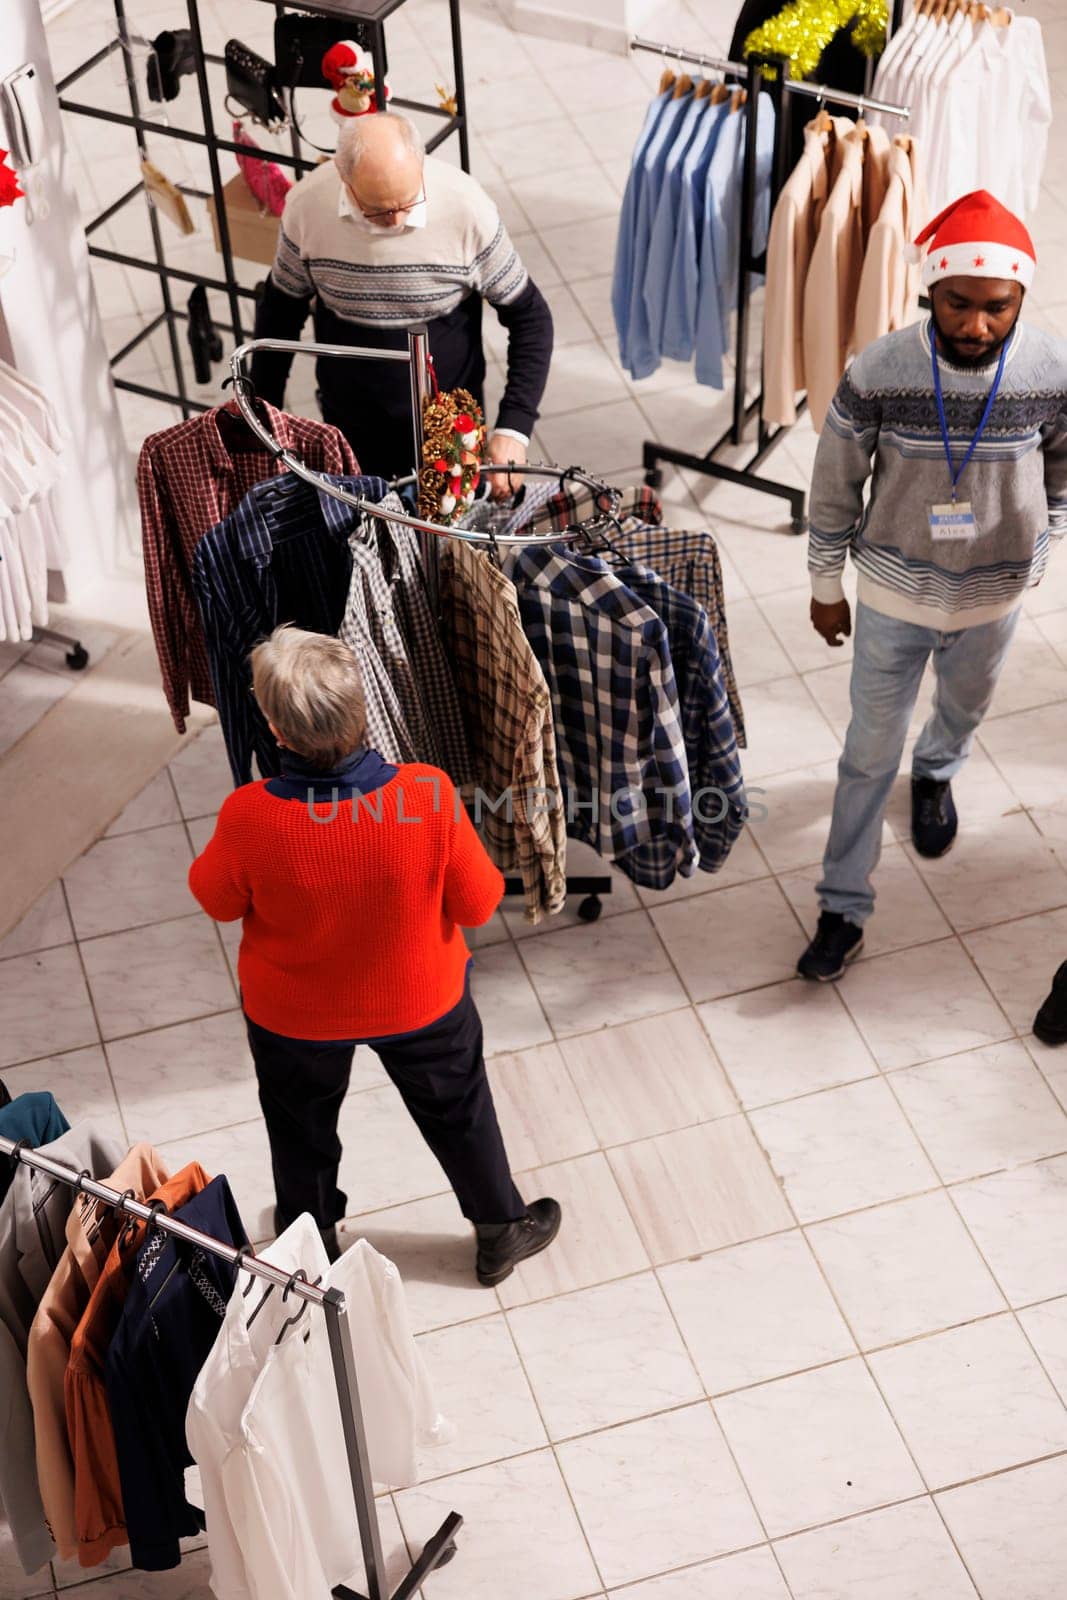 Various shoppers looking at clothing items on racks in shopping center while seeking for garments to purchase. Consumers going apparel shopping as gifts for festive season, Christmas eve.